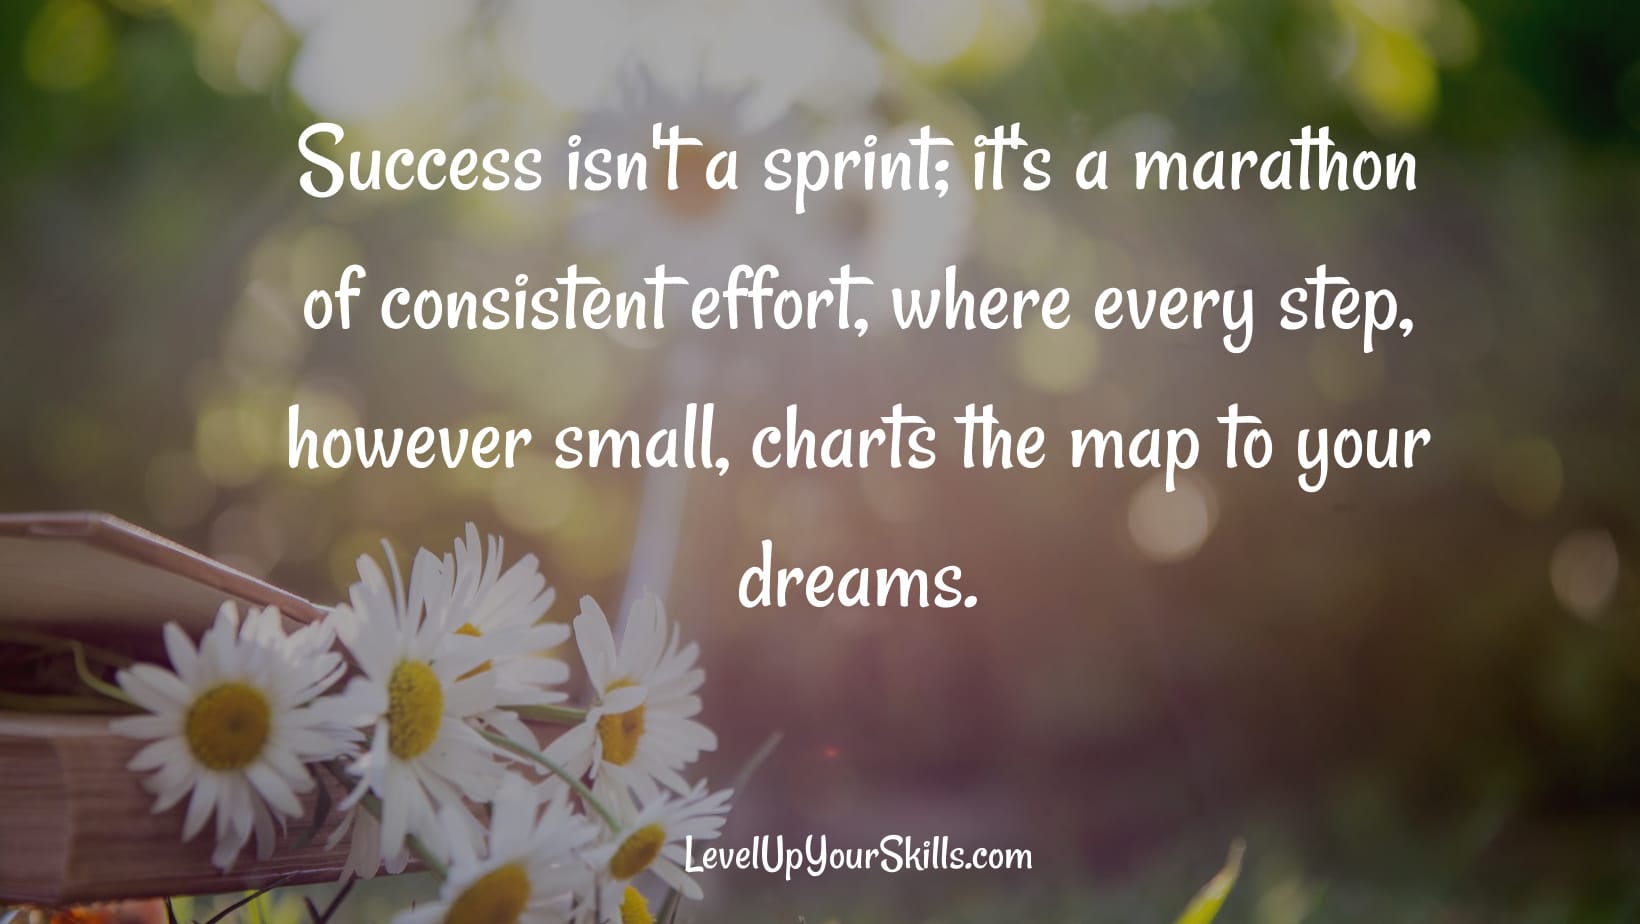 The Law Of Consistent Effort Assures Success Every Time